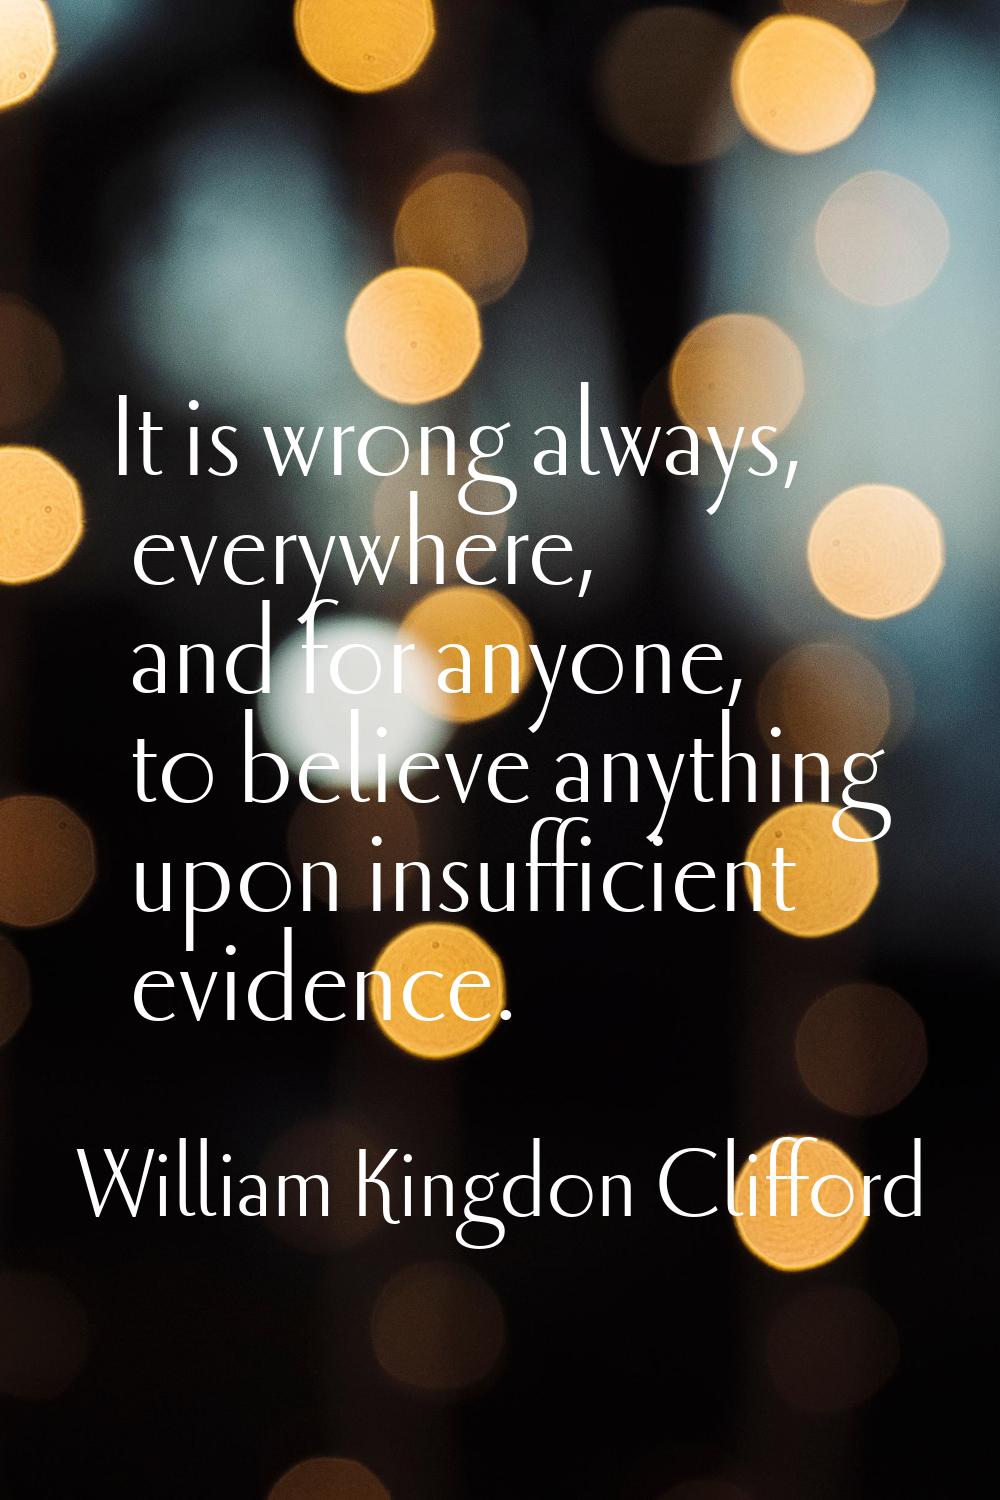 It is wrong always, everywhere, and for anyone, to believe anything upon insufficient evidence.